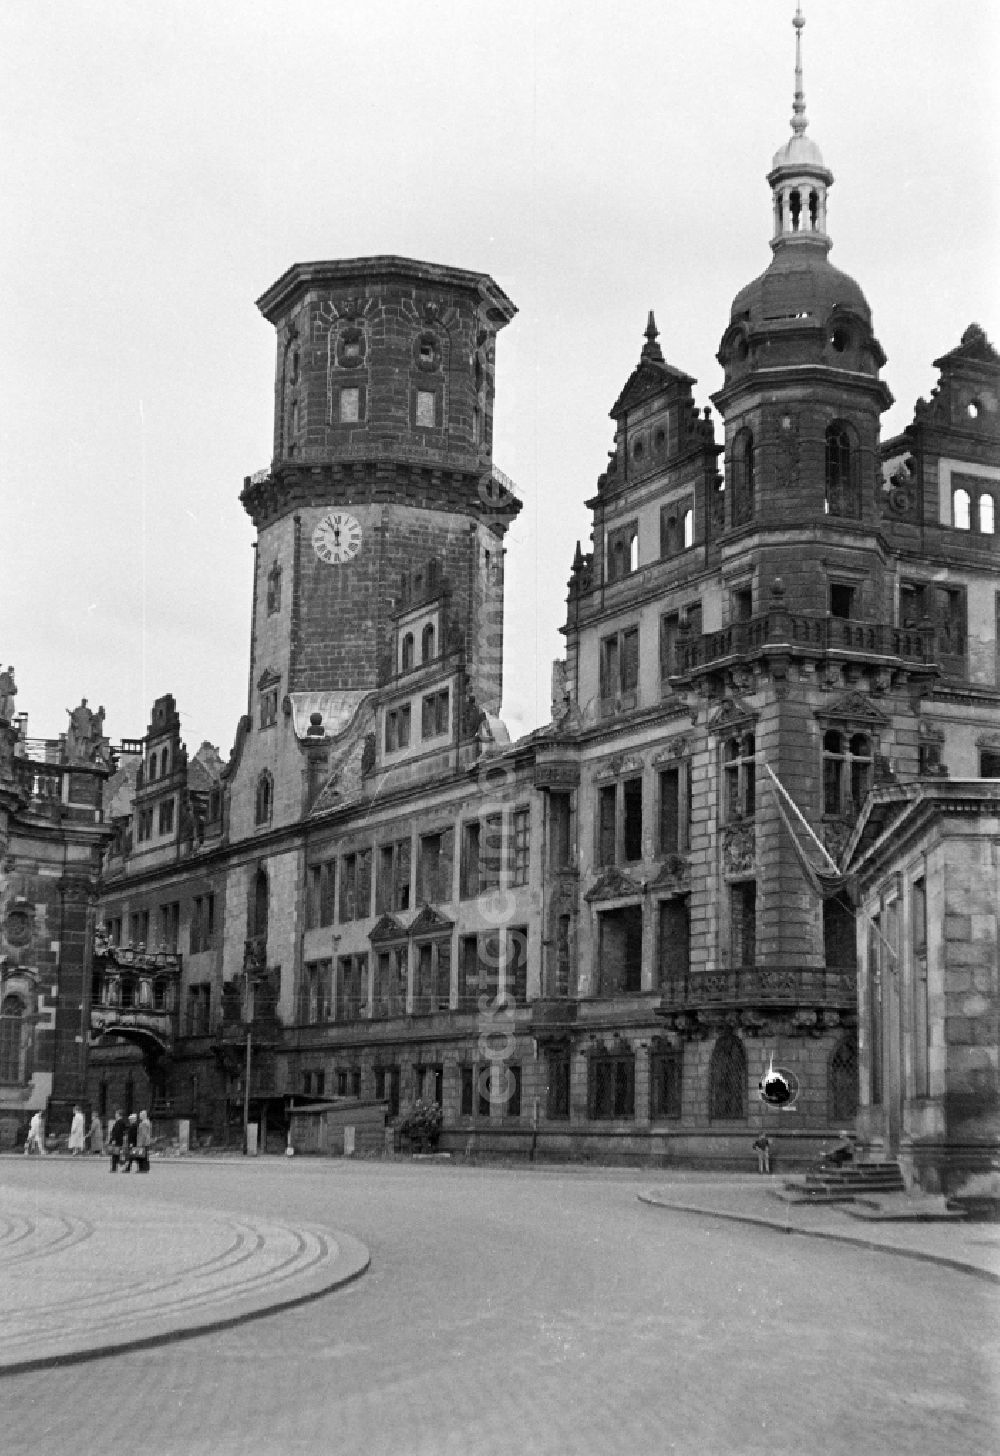 GDR photo archive: Dresden - Ruins of the rest of the facade and roof structuredes Dresdner Schloss on bridge Augustusbruecke in the district Altstadt in Dresden, Saxony on the territory of the former GDR, German Democratic Republic